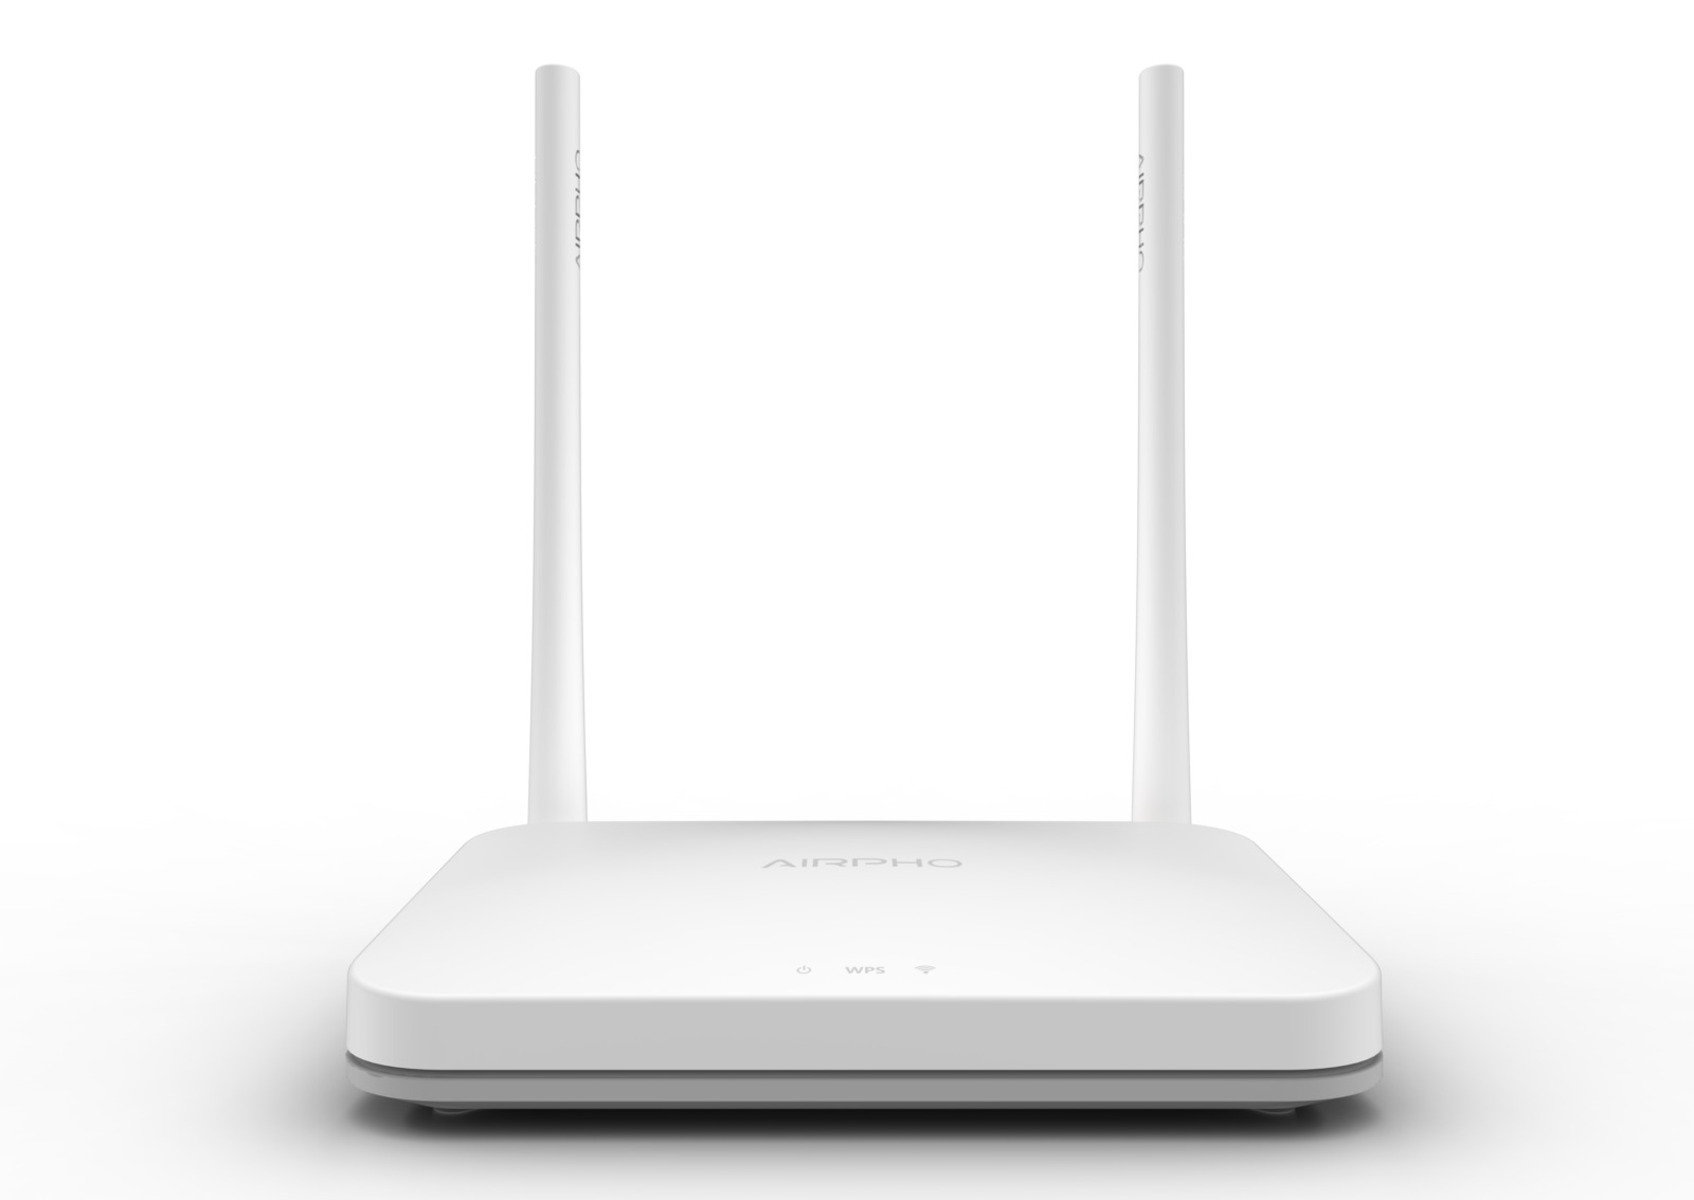 WLAN 300 AR-W200 Router AIRPHO Mbit/s